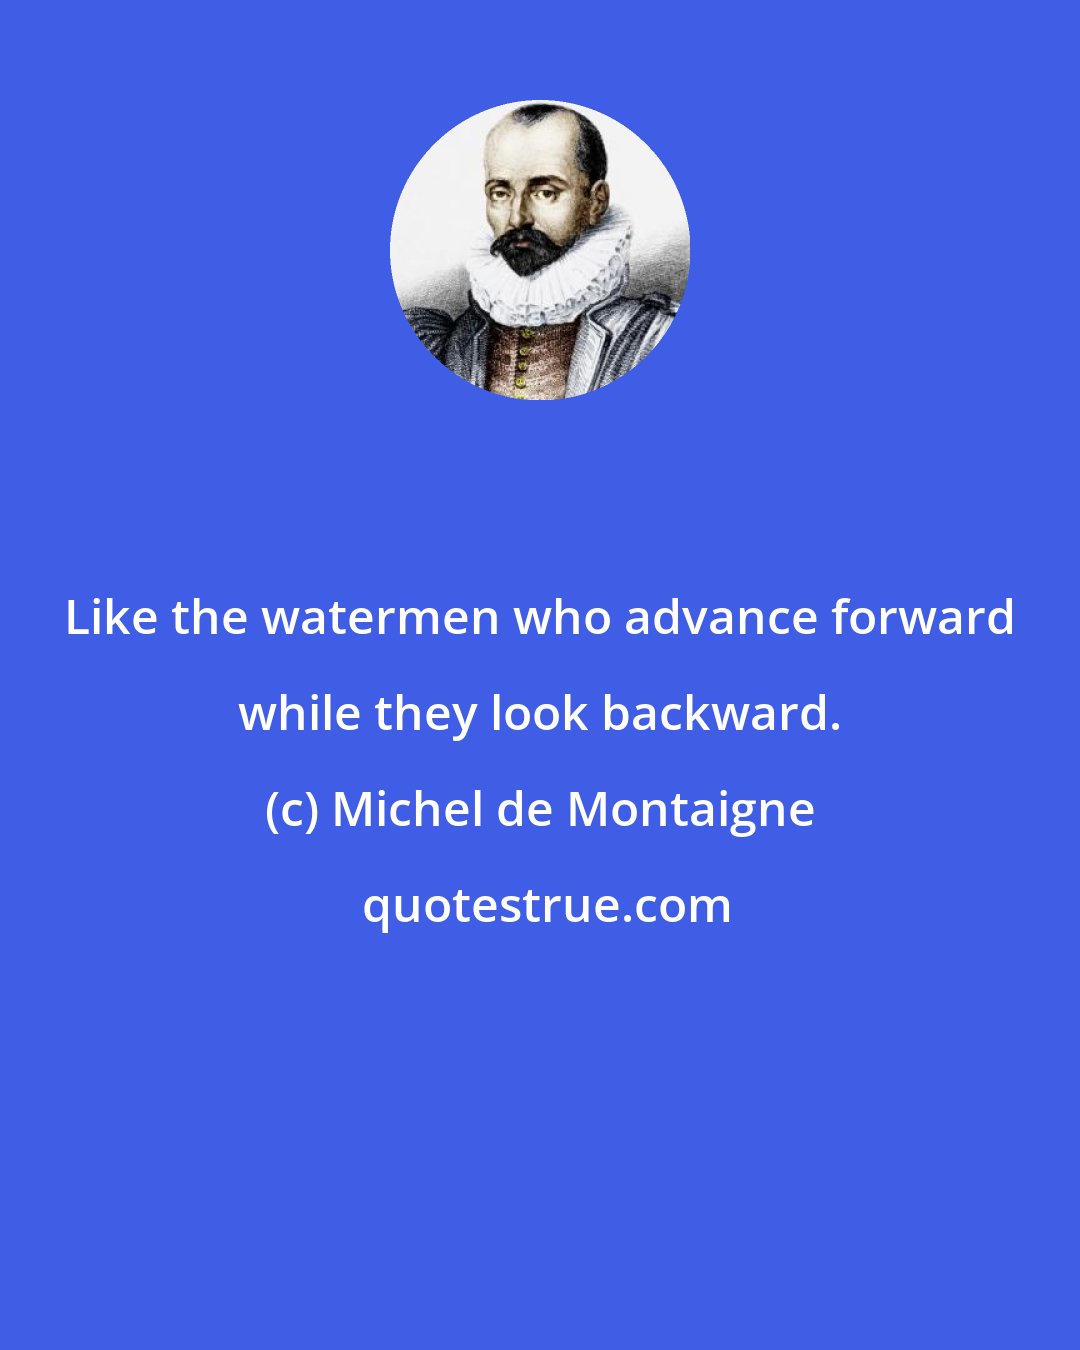 Michel de Montaigne: Like the watermen who advance forward while they look backward.